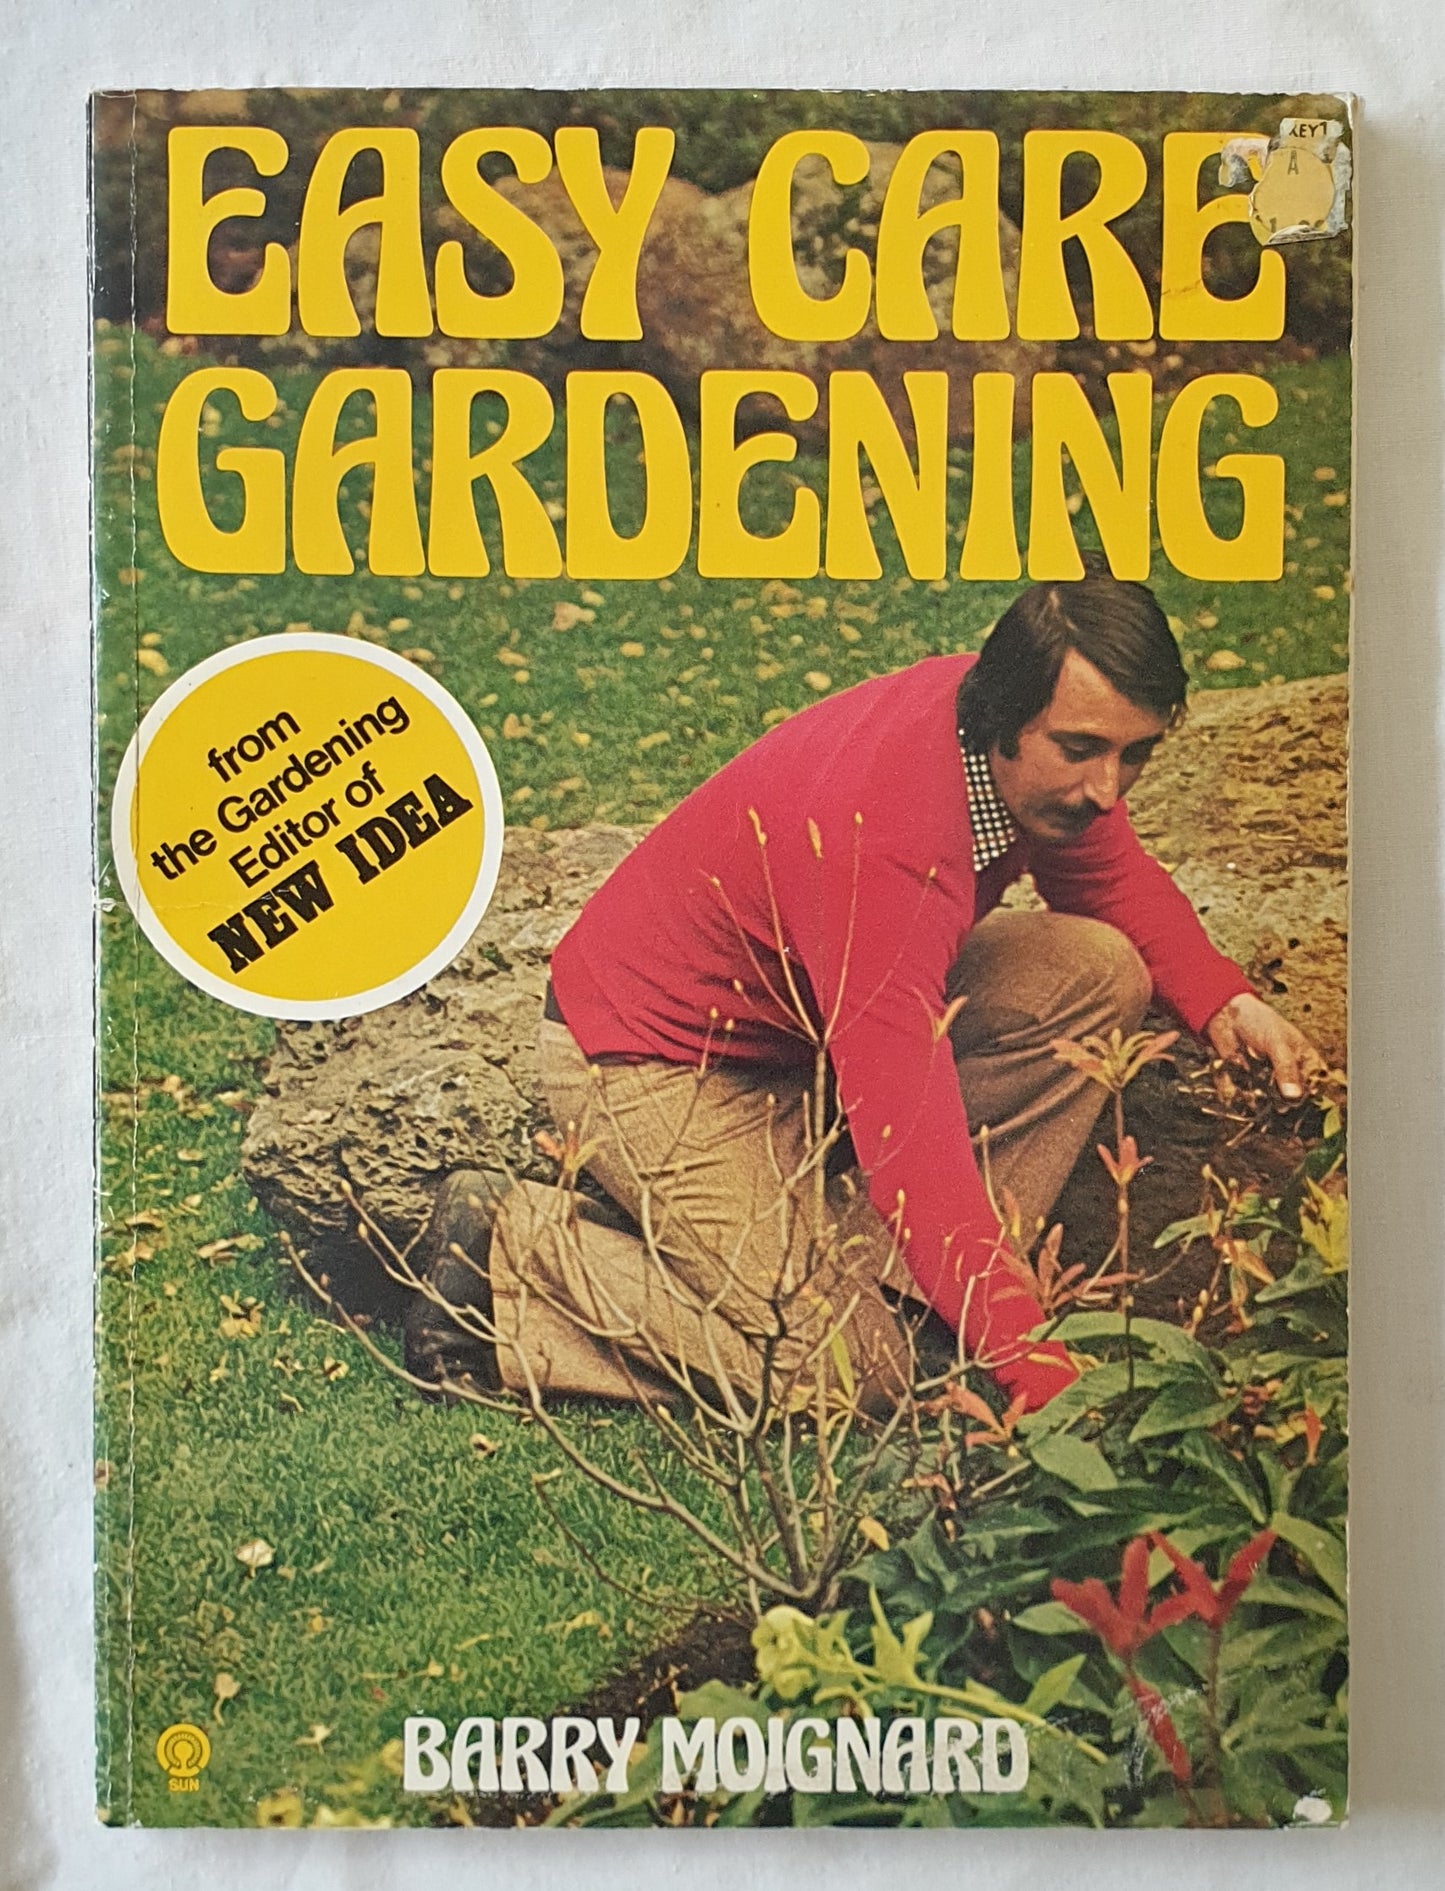 Easy Care Gardening by Barry Moignard